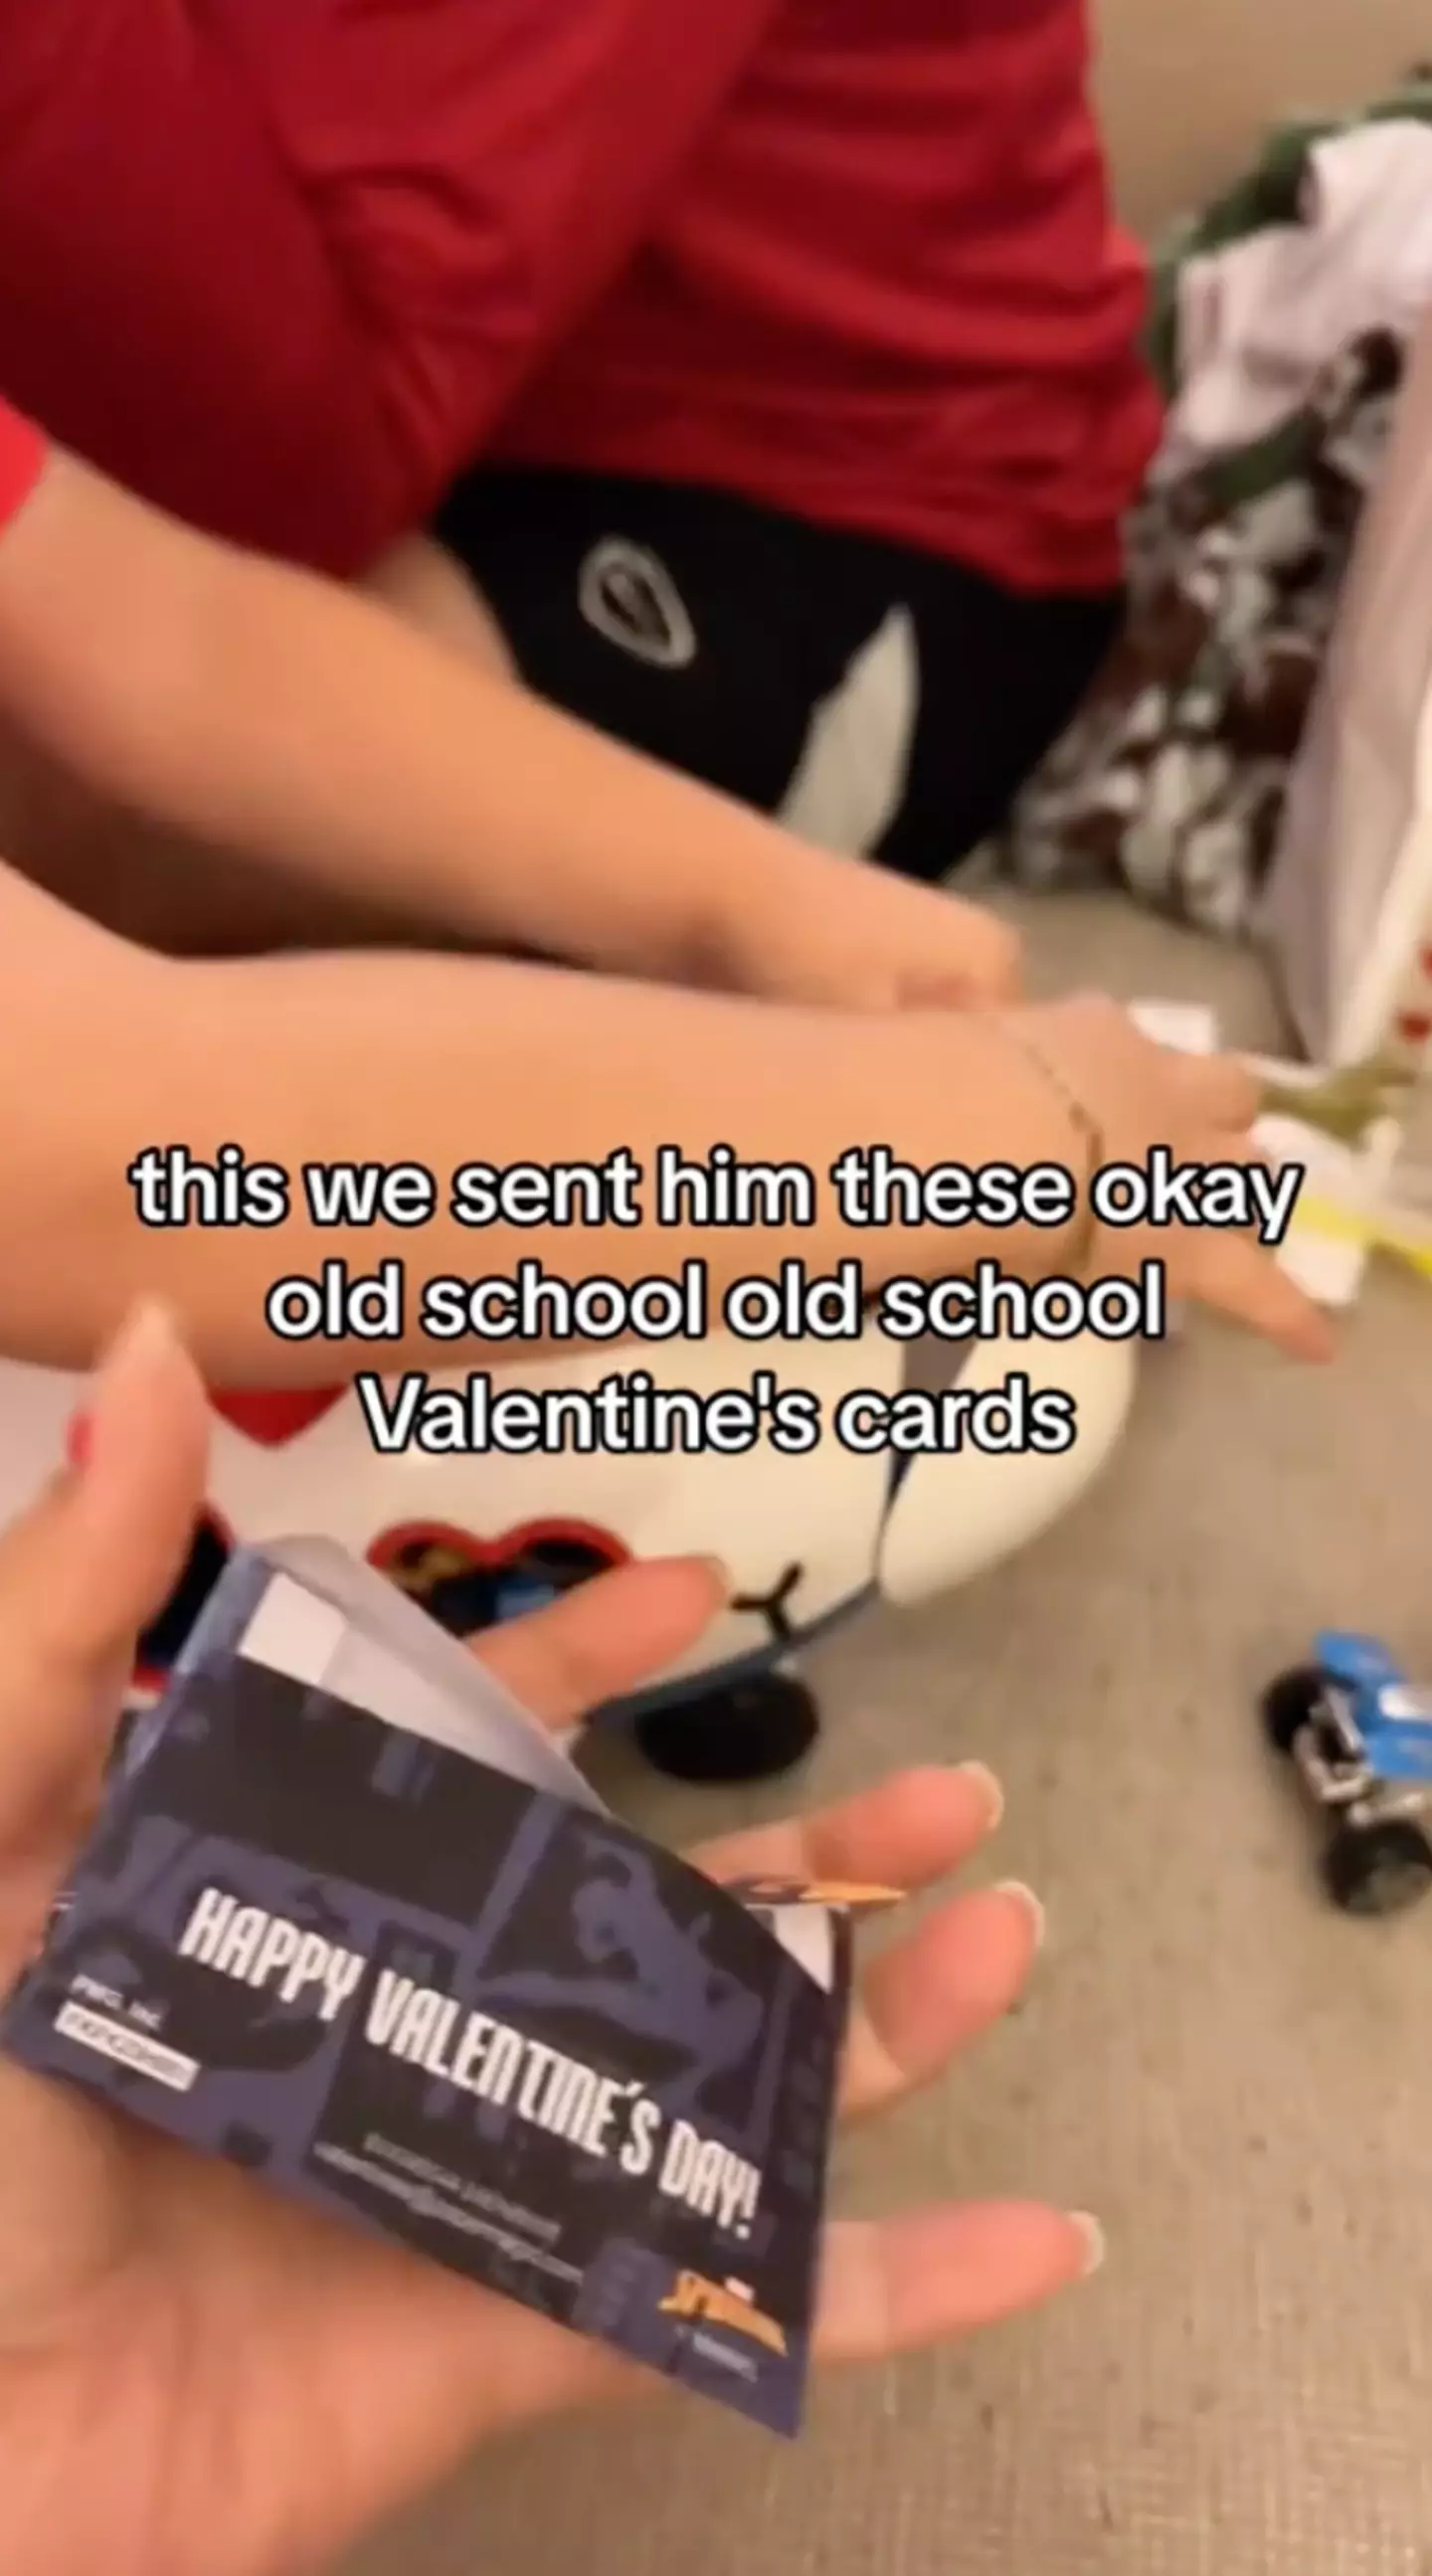 Max gave out 'old school' Valentine's cards with an eraser.